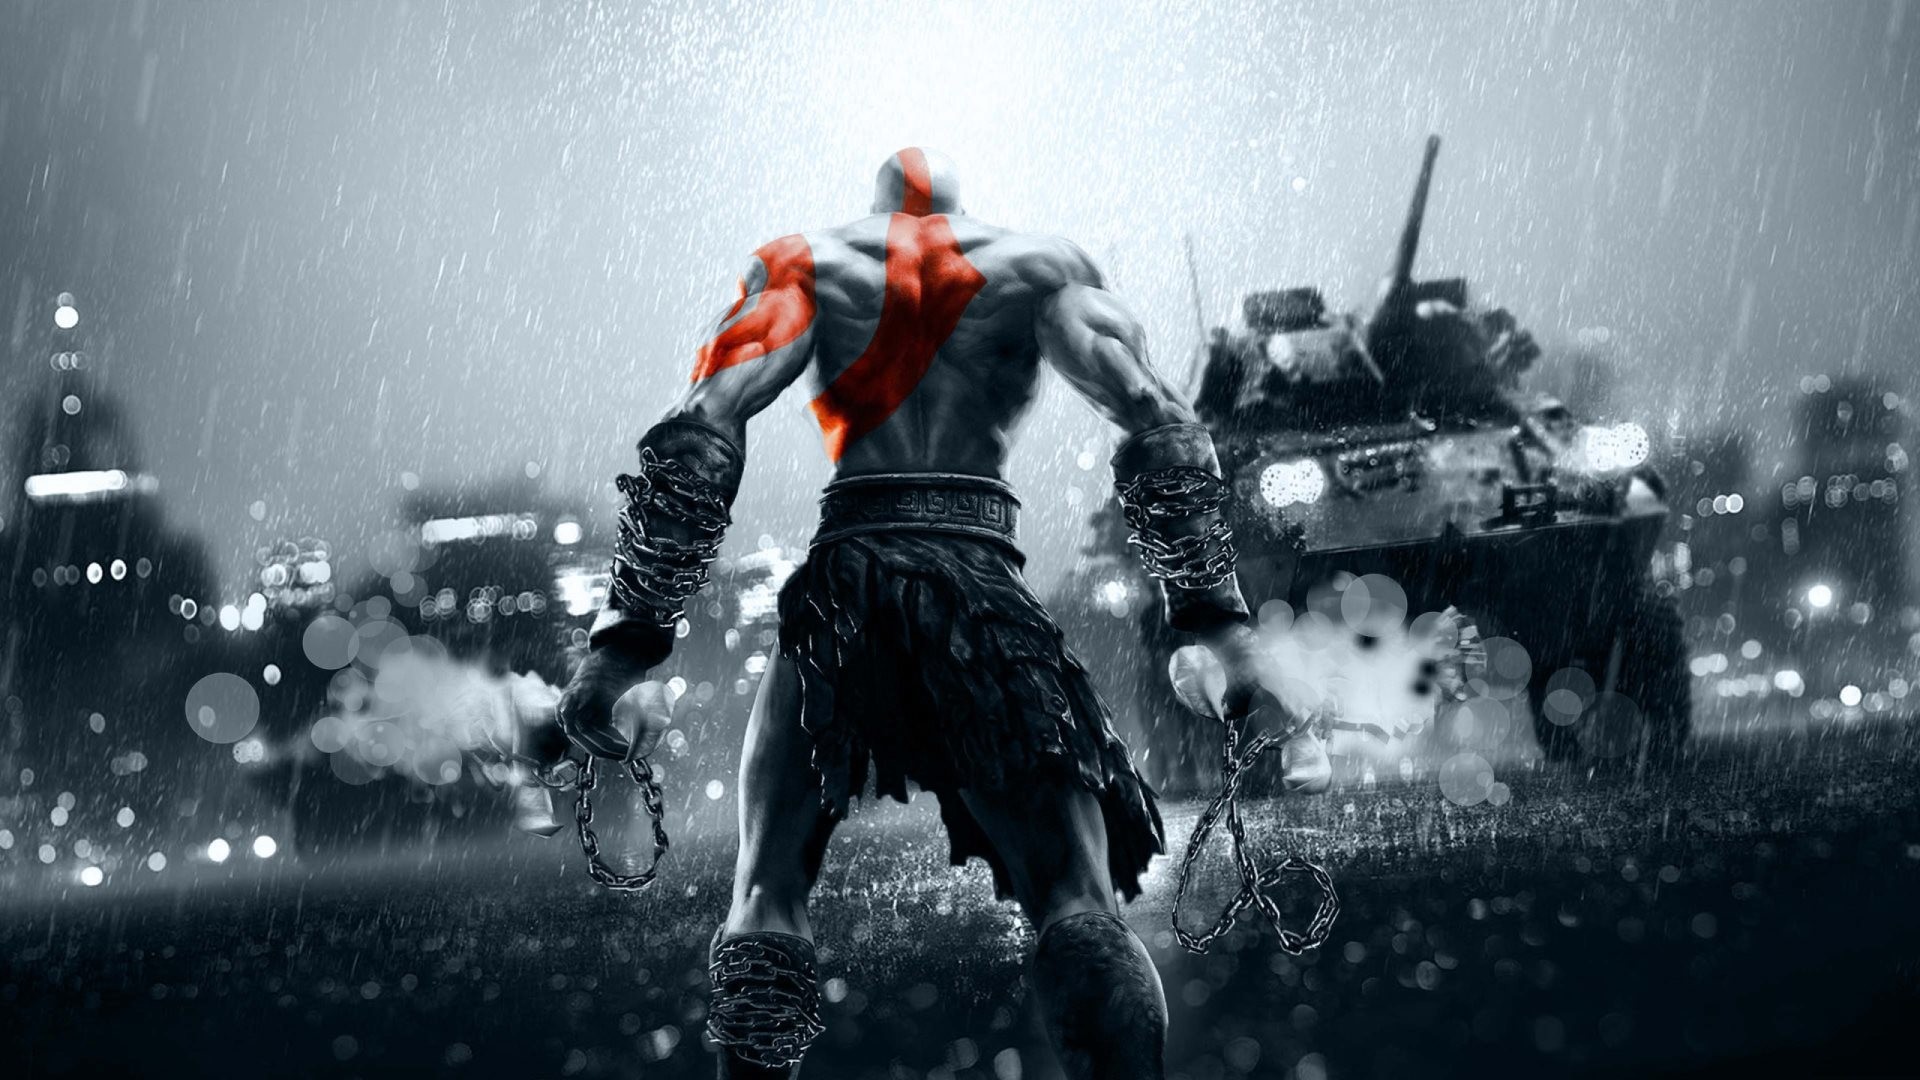 1920x1080 Epic wallpaper with God Of War game listed below in 4K, HD and wide sizes Â·  Download this God Of War wallpaper optimized for apply in phones, ...